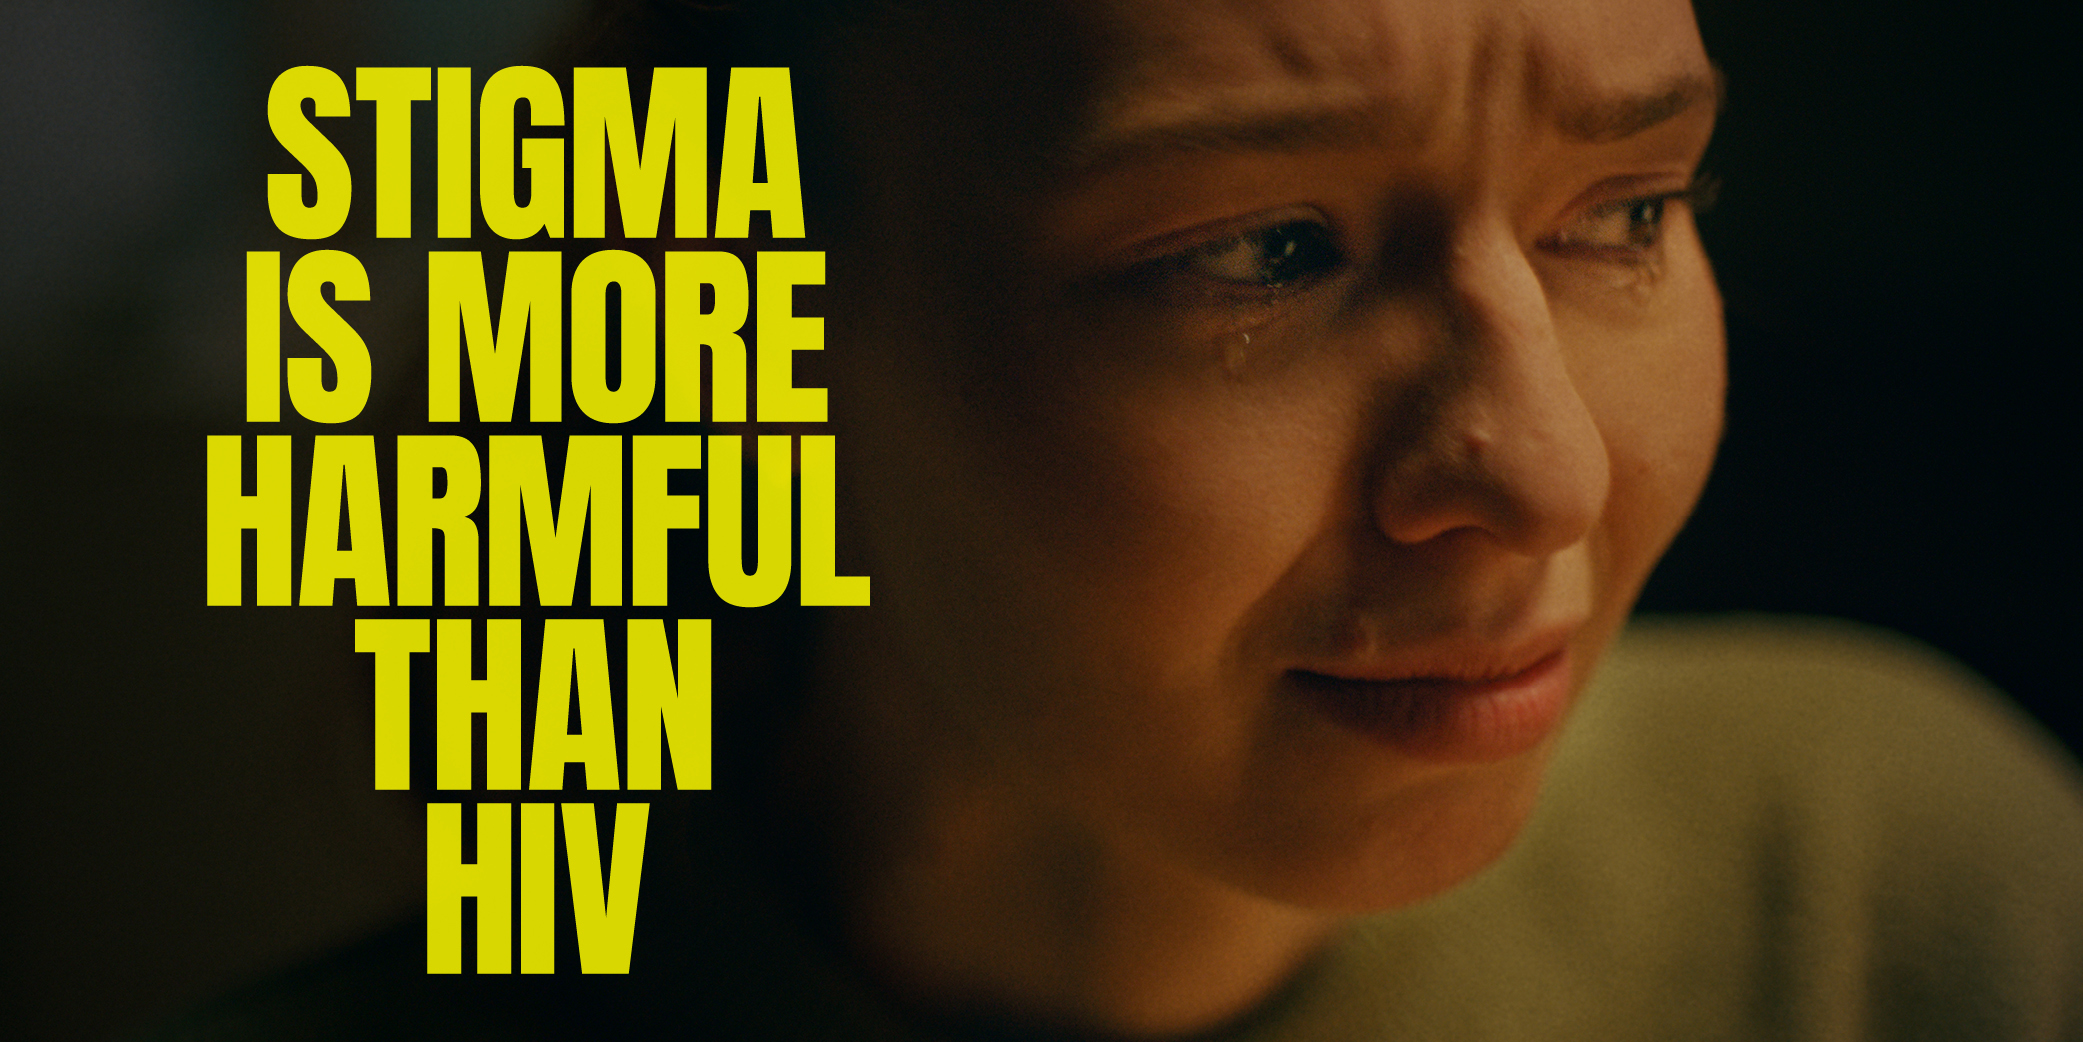 Image of a person in distress and text stigma is more harmful than HIV